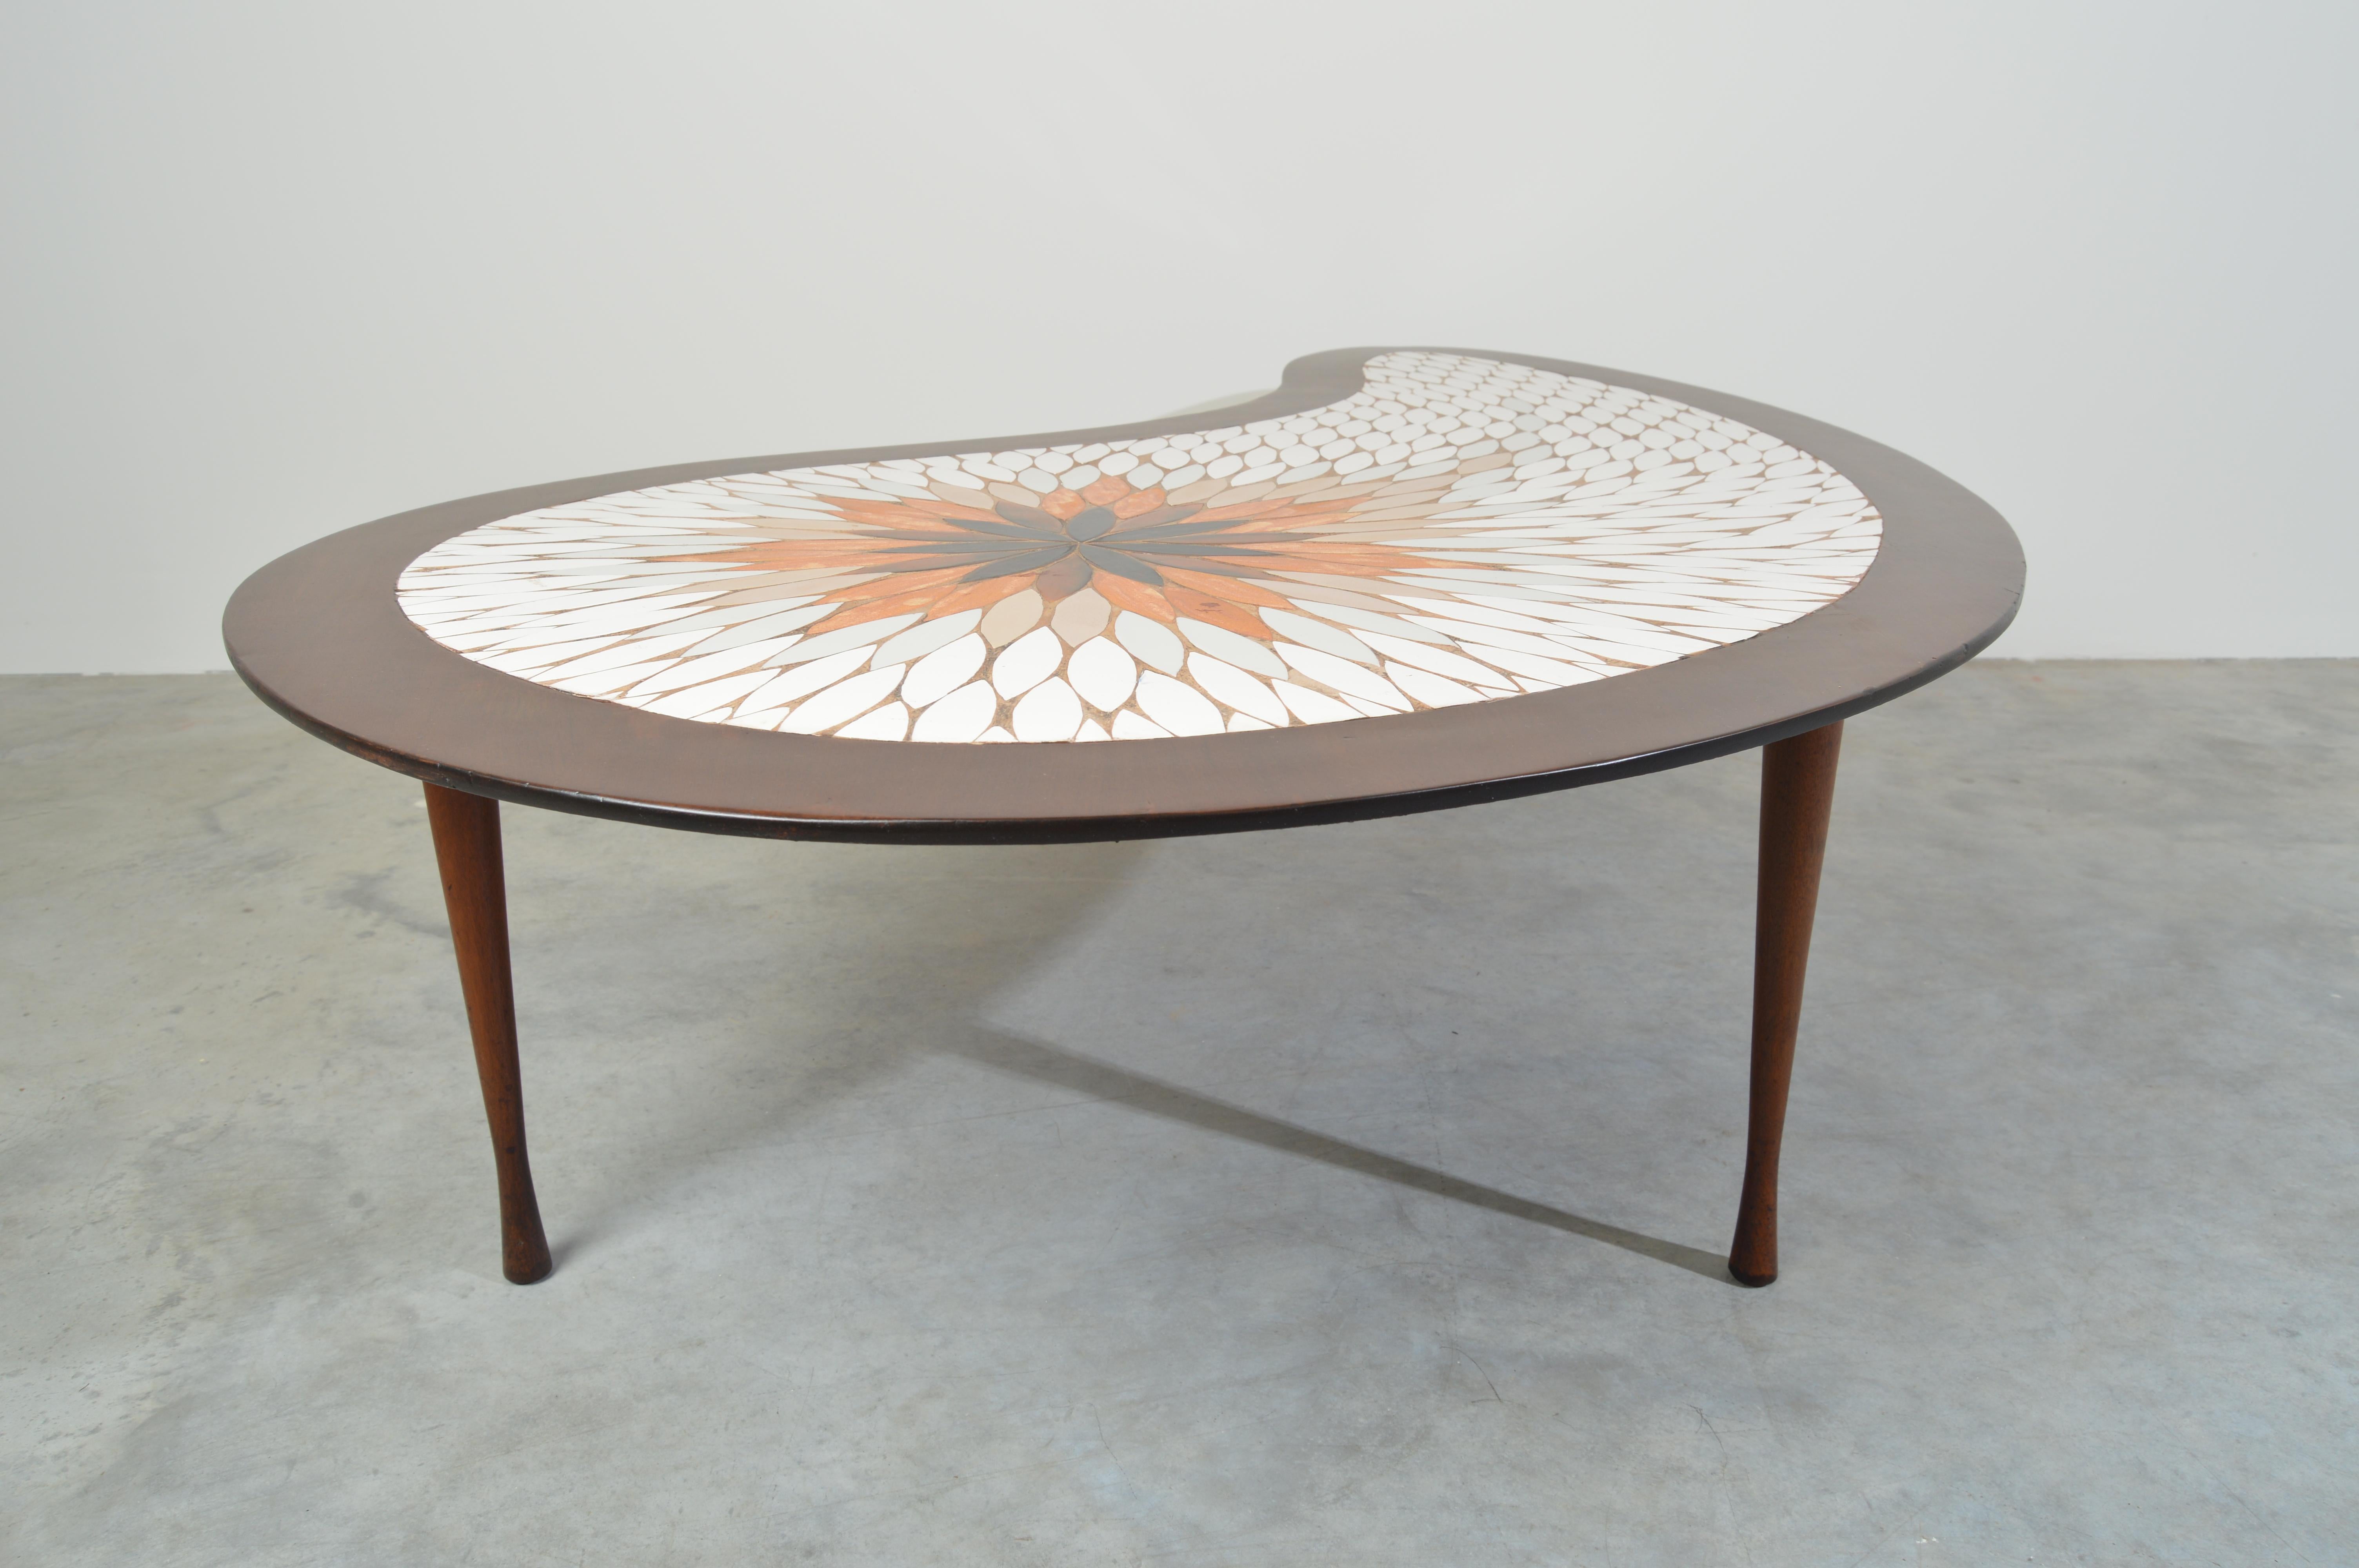 Midcentury Kidney Shaped Mosaic Coffee Table by Hohenberg Originals 2